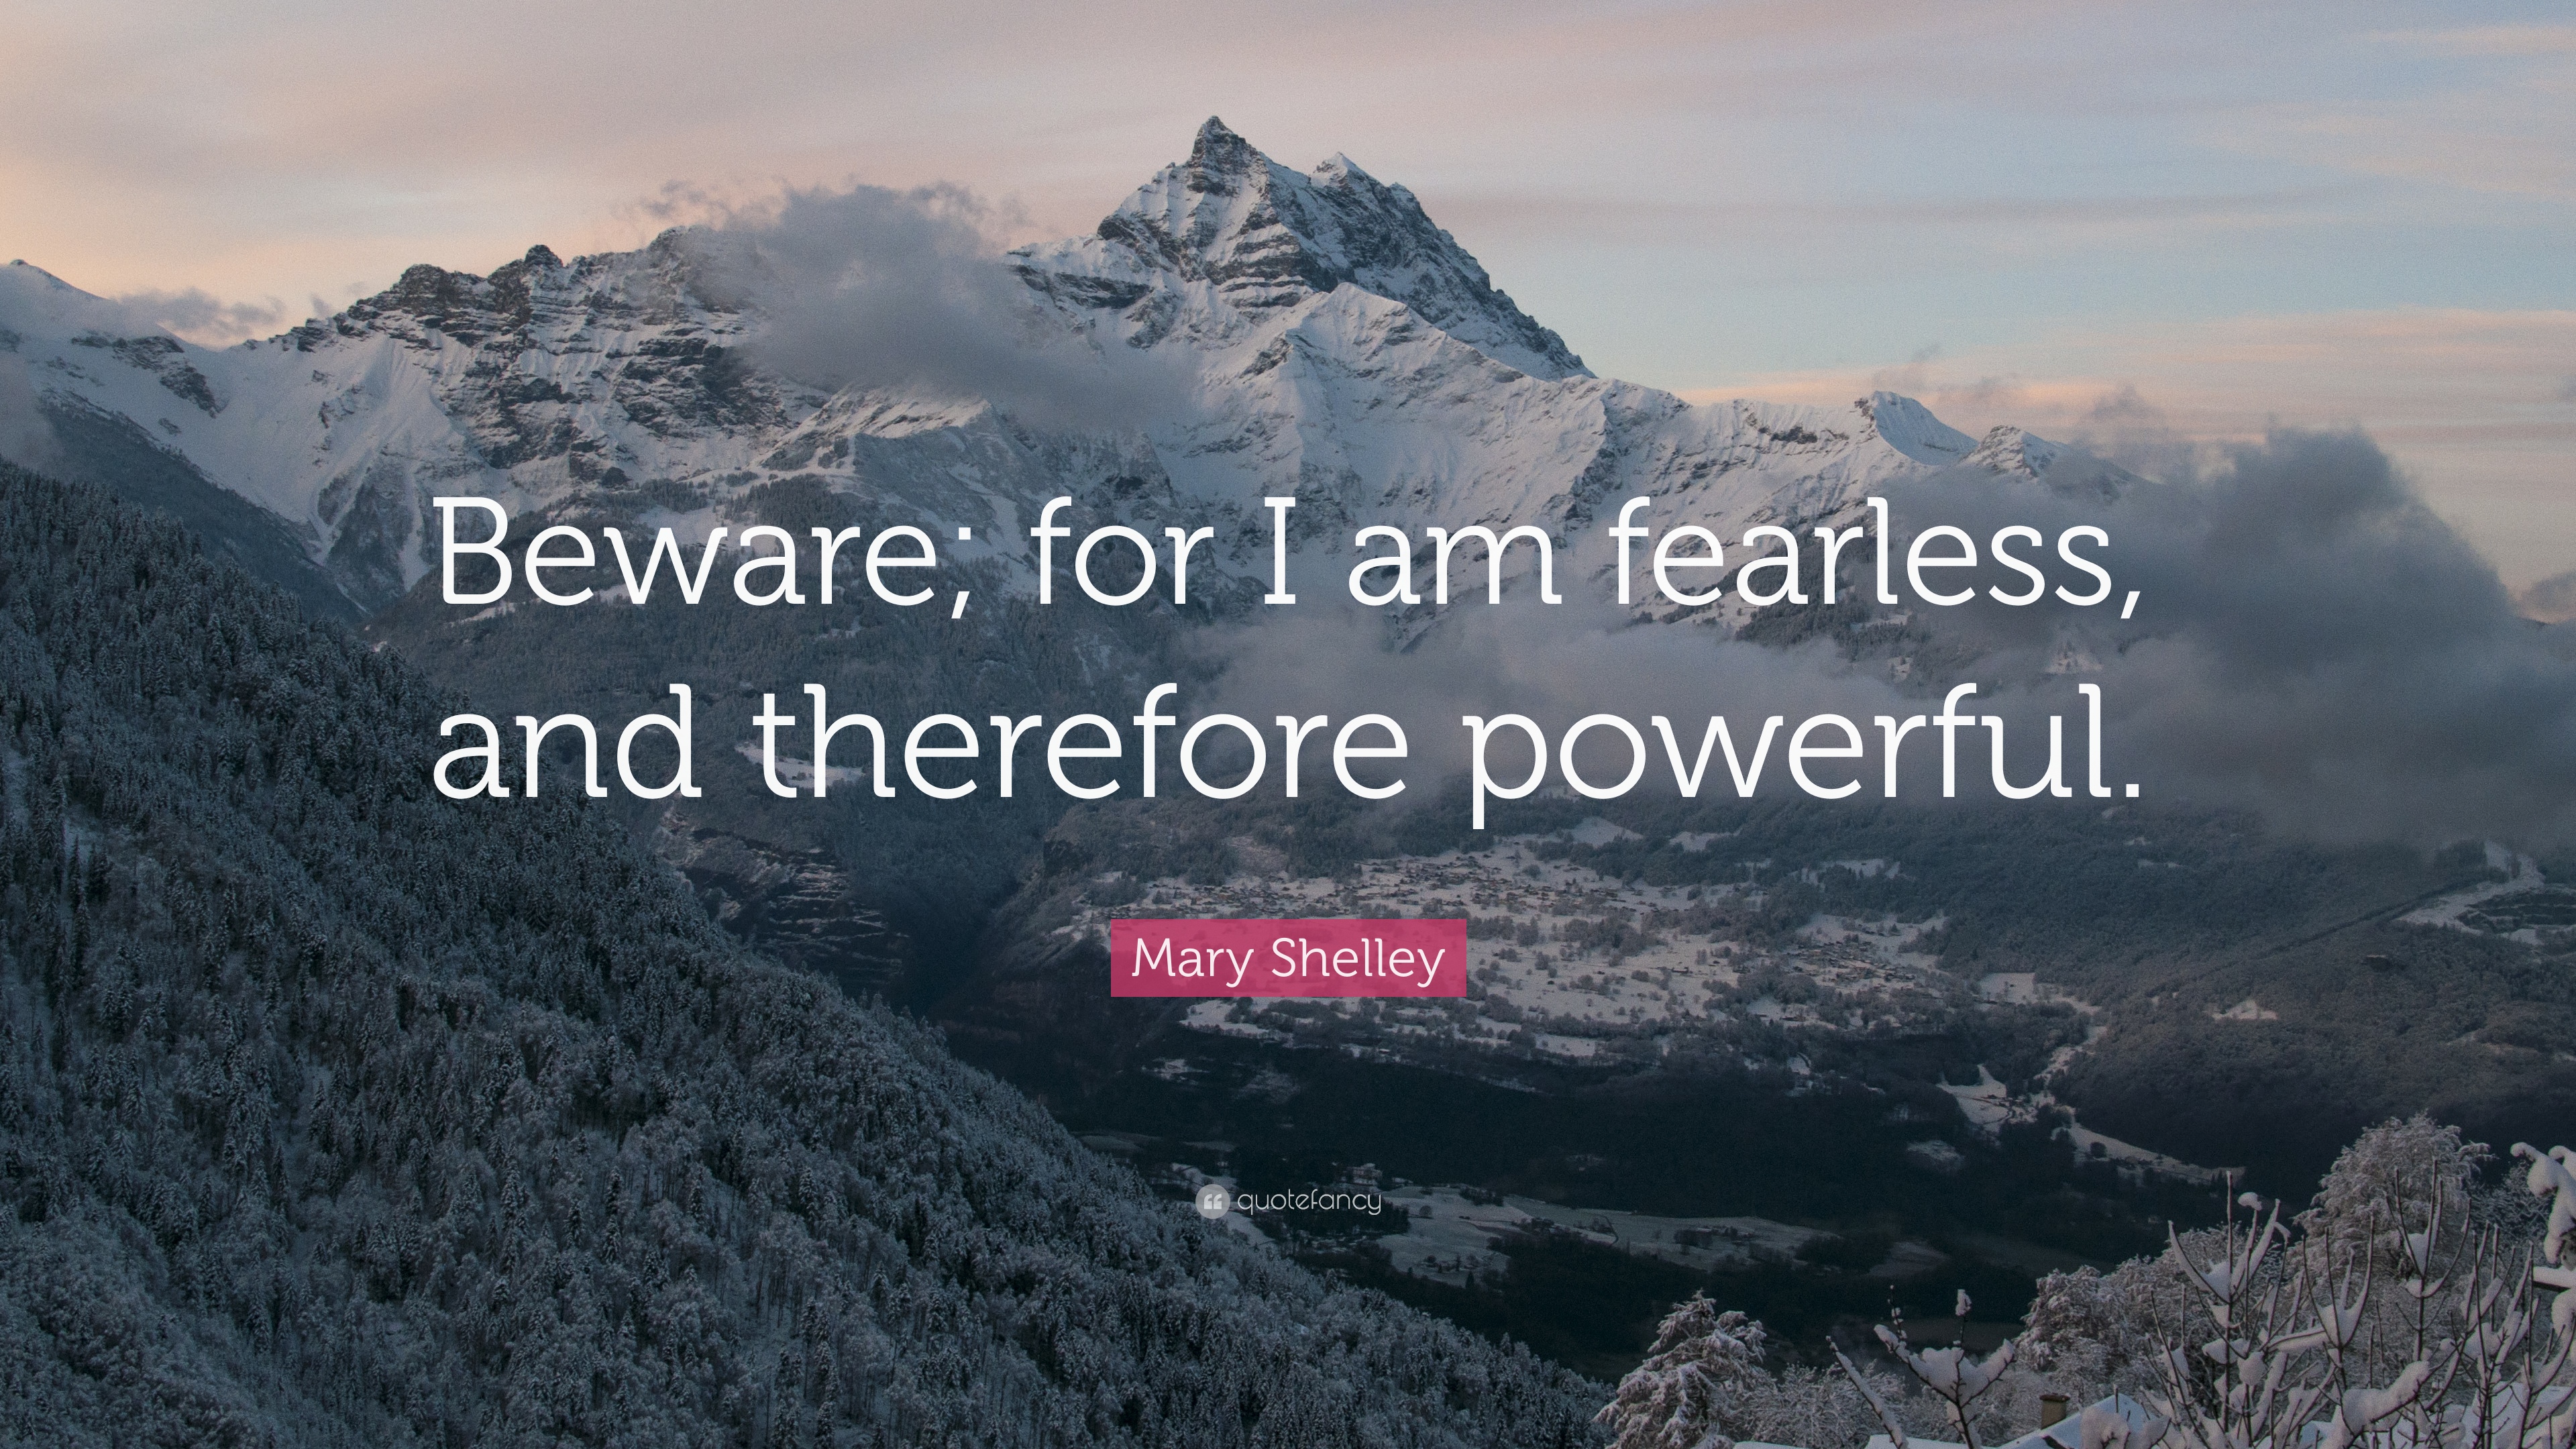 Mary Shelley Quote: “Beware; for I am fearless, and therefore ...